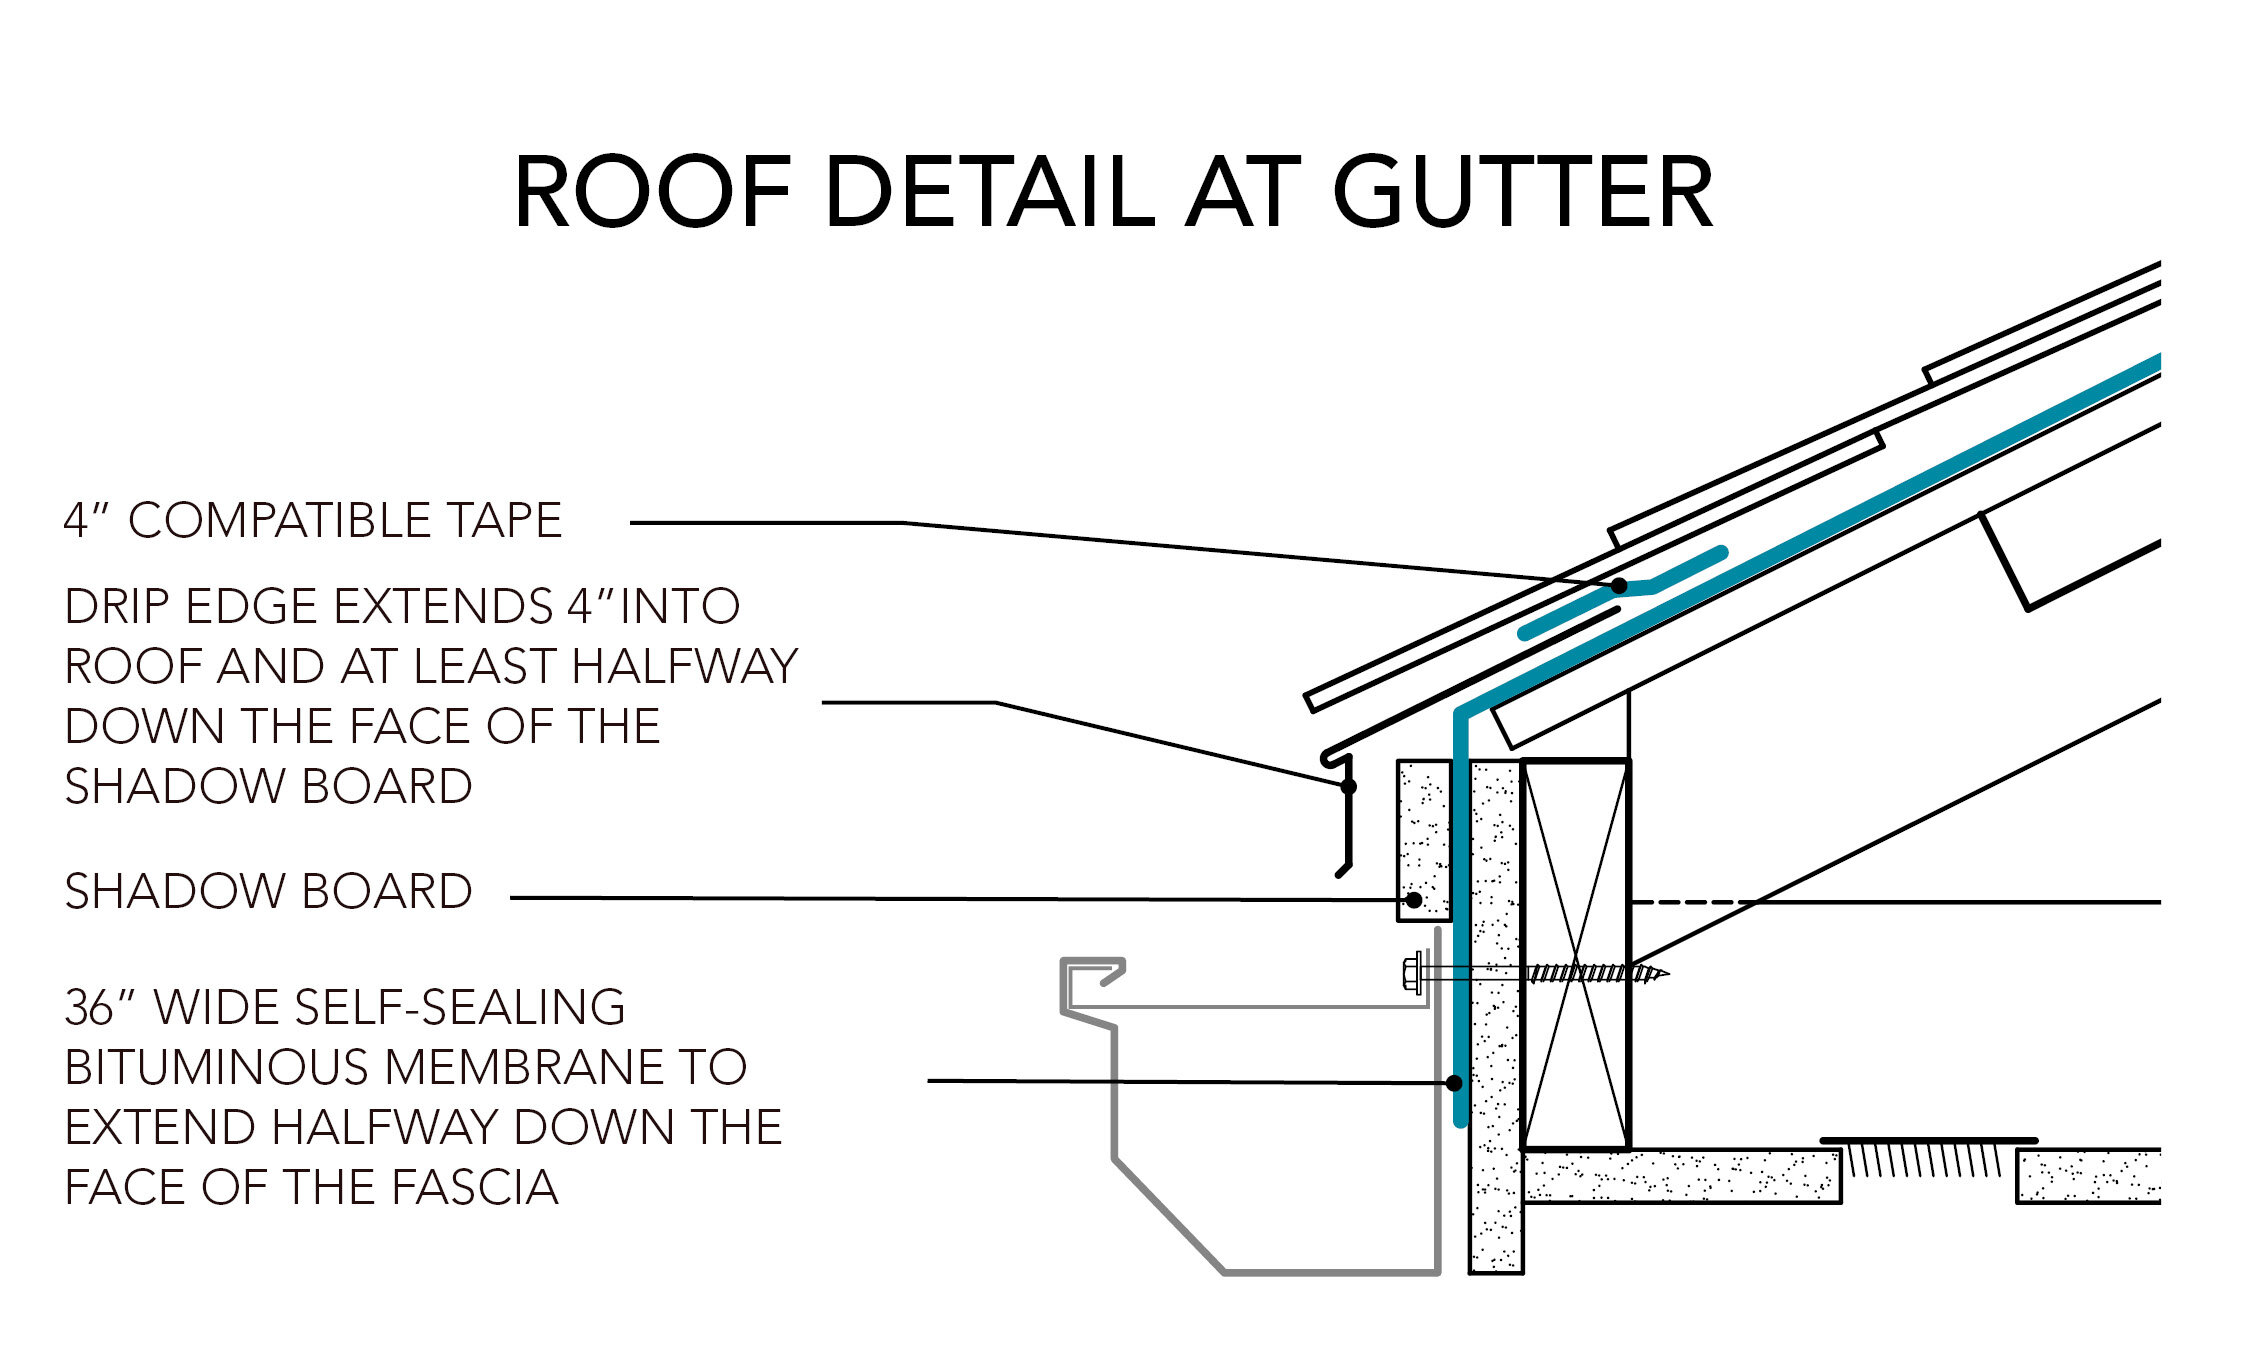 ROOFING — Basis of Design